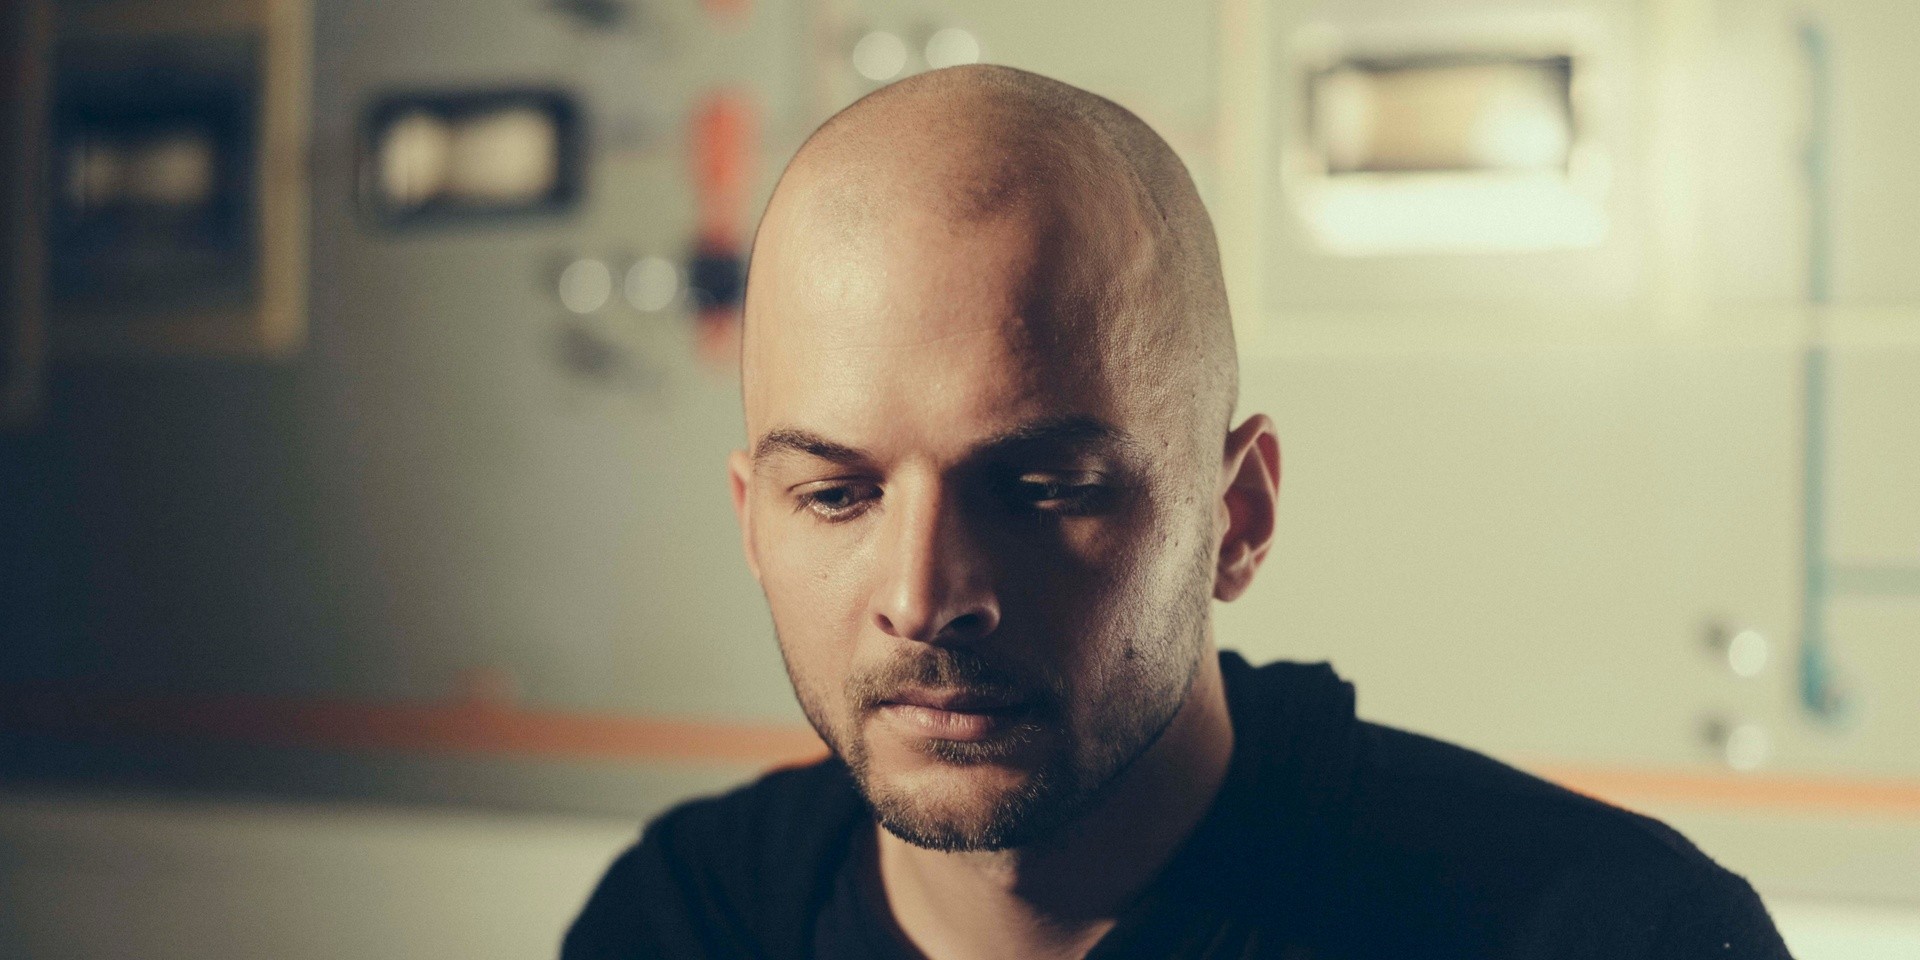 Nils Frahm on music-making as a lottery: "You'll never know what comes across that might inspire you or grab your attention"